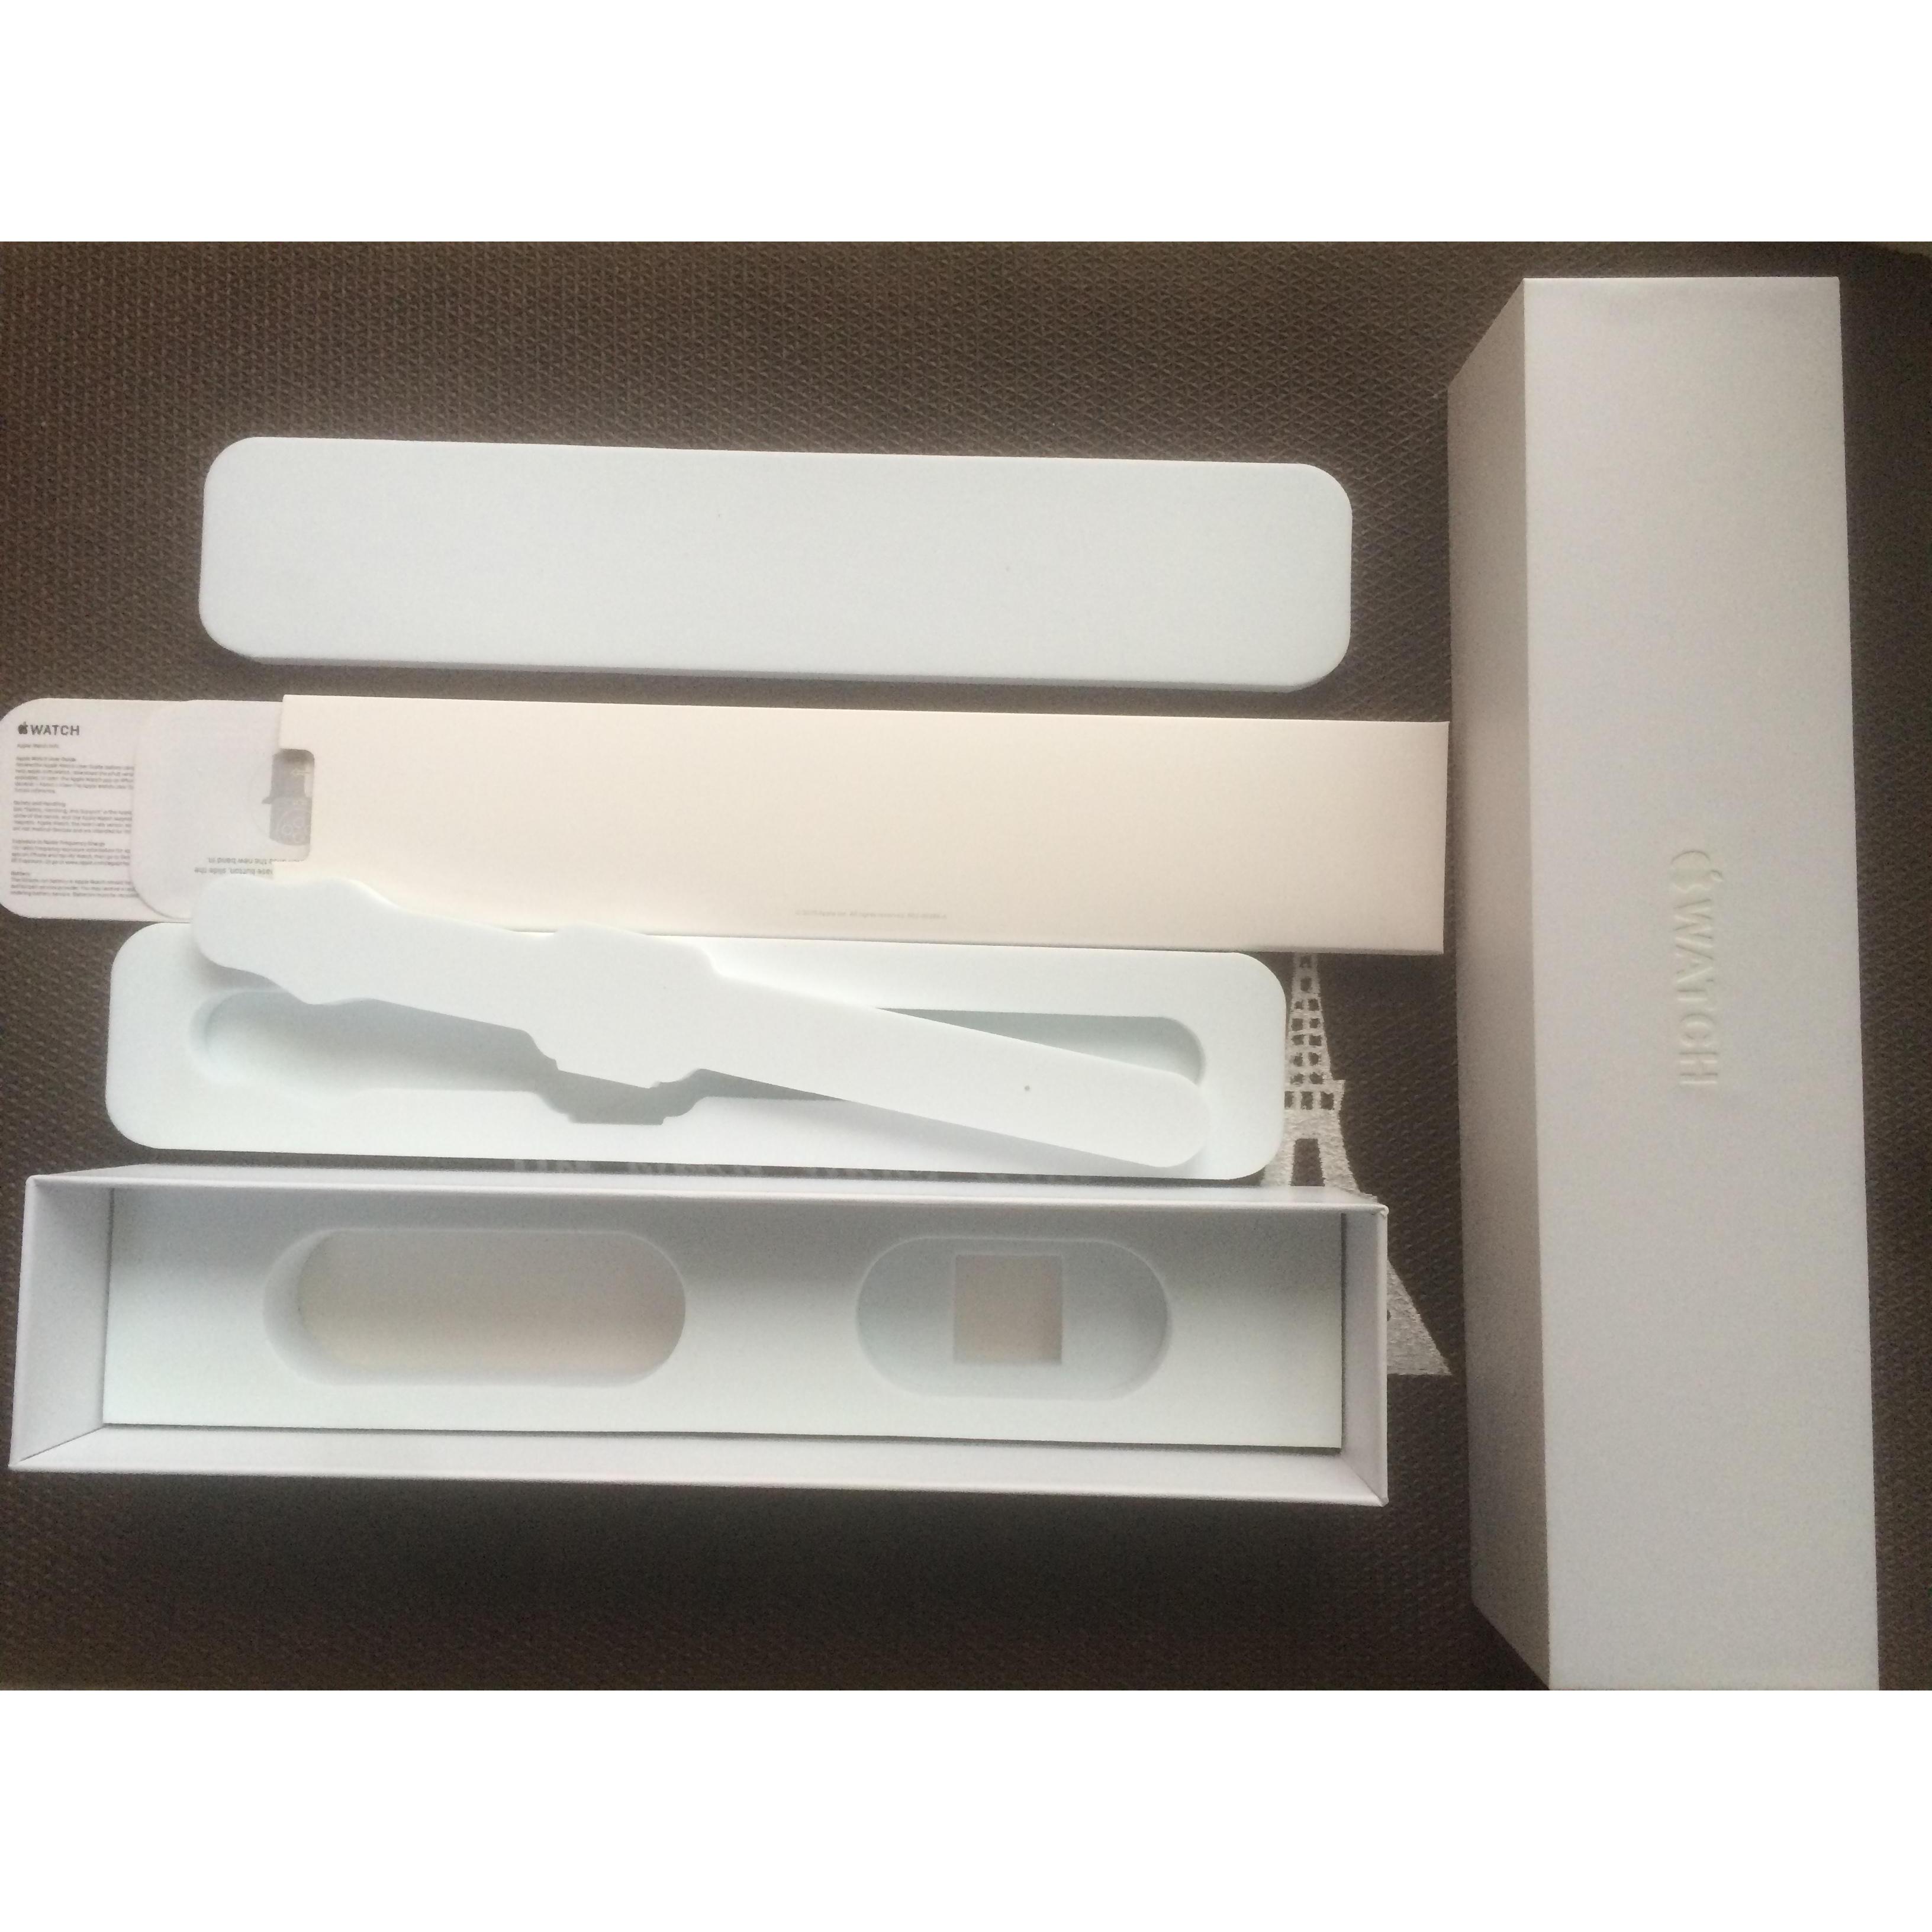 Apple IWATCH Wholesale Suppliers